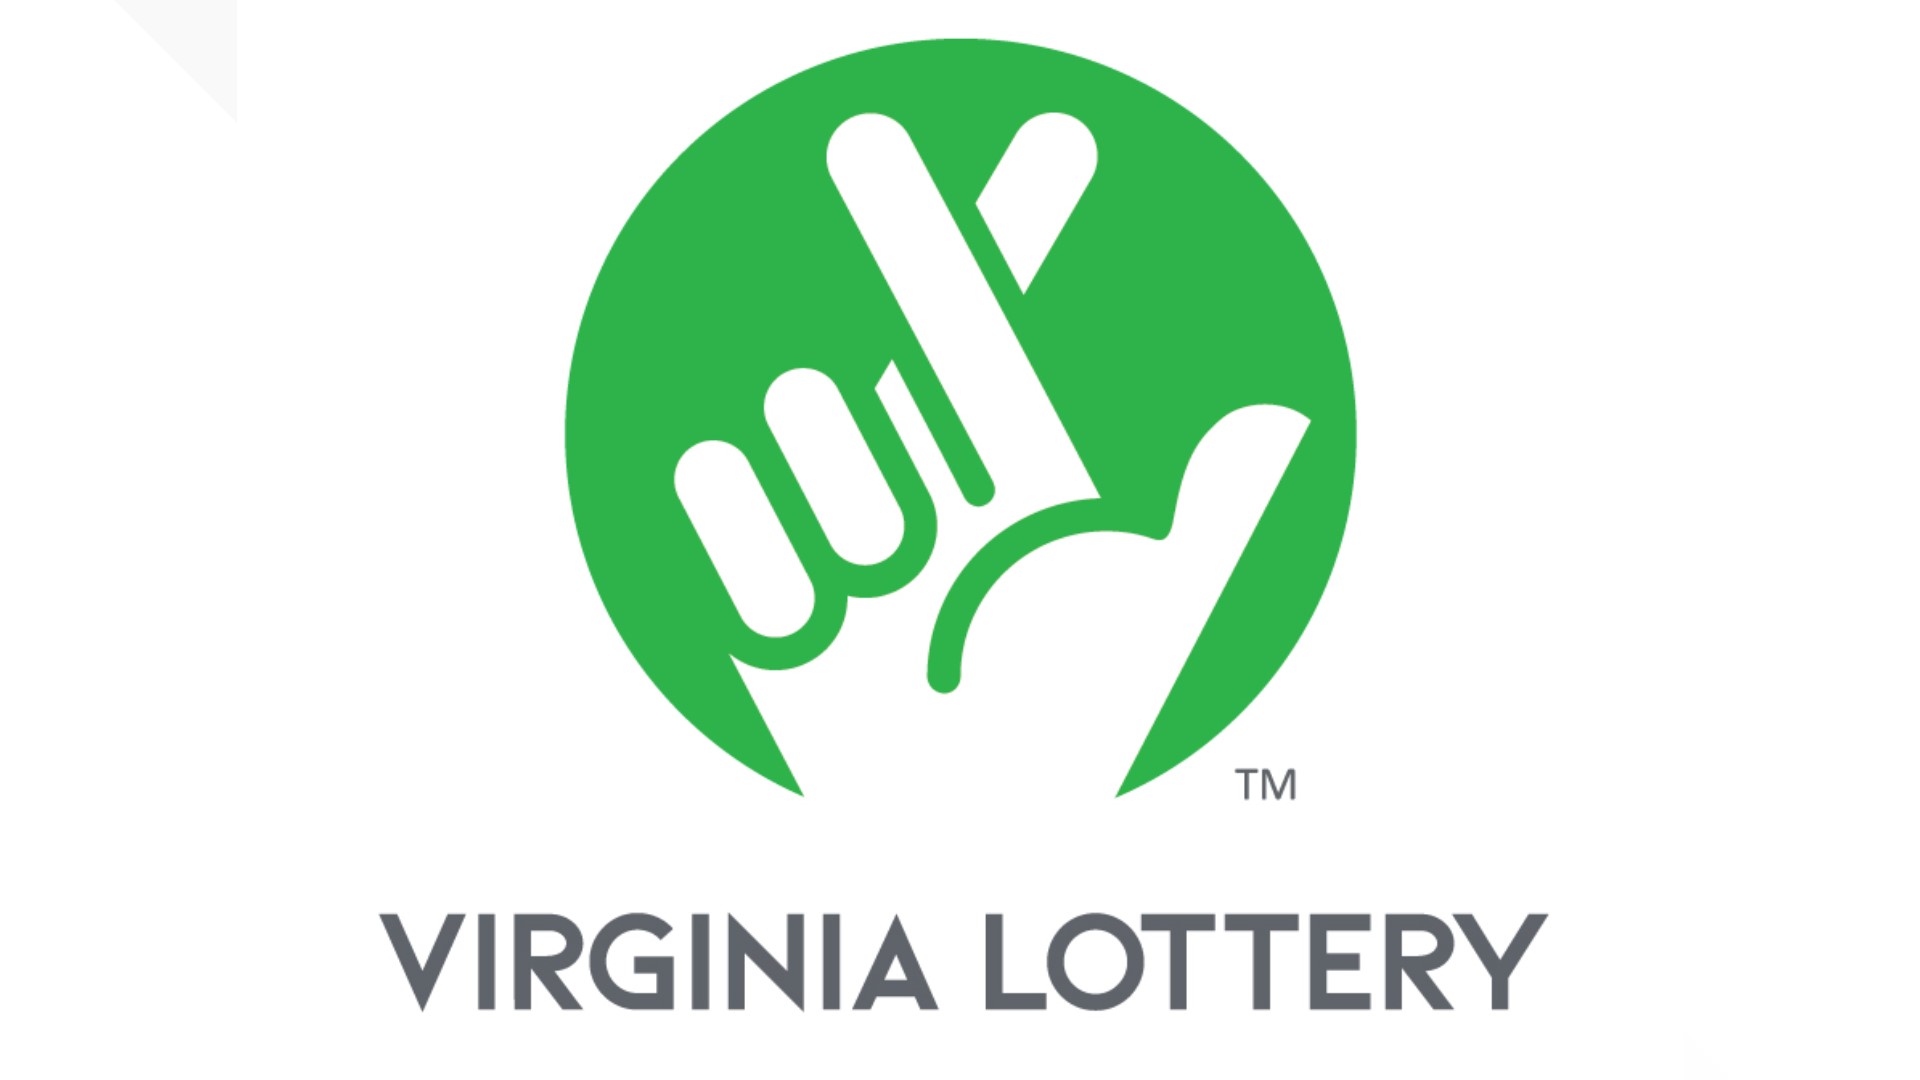 Two new Maryland millionaires will be able to keep their winnings a secret, but if you win big in Virginia or D.C., you may not be so lucky.